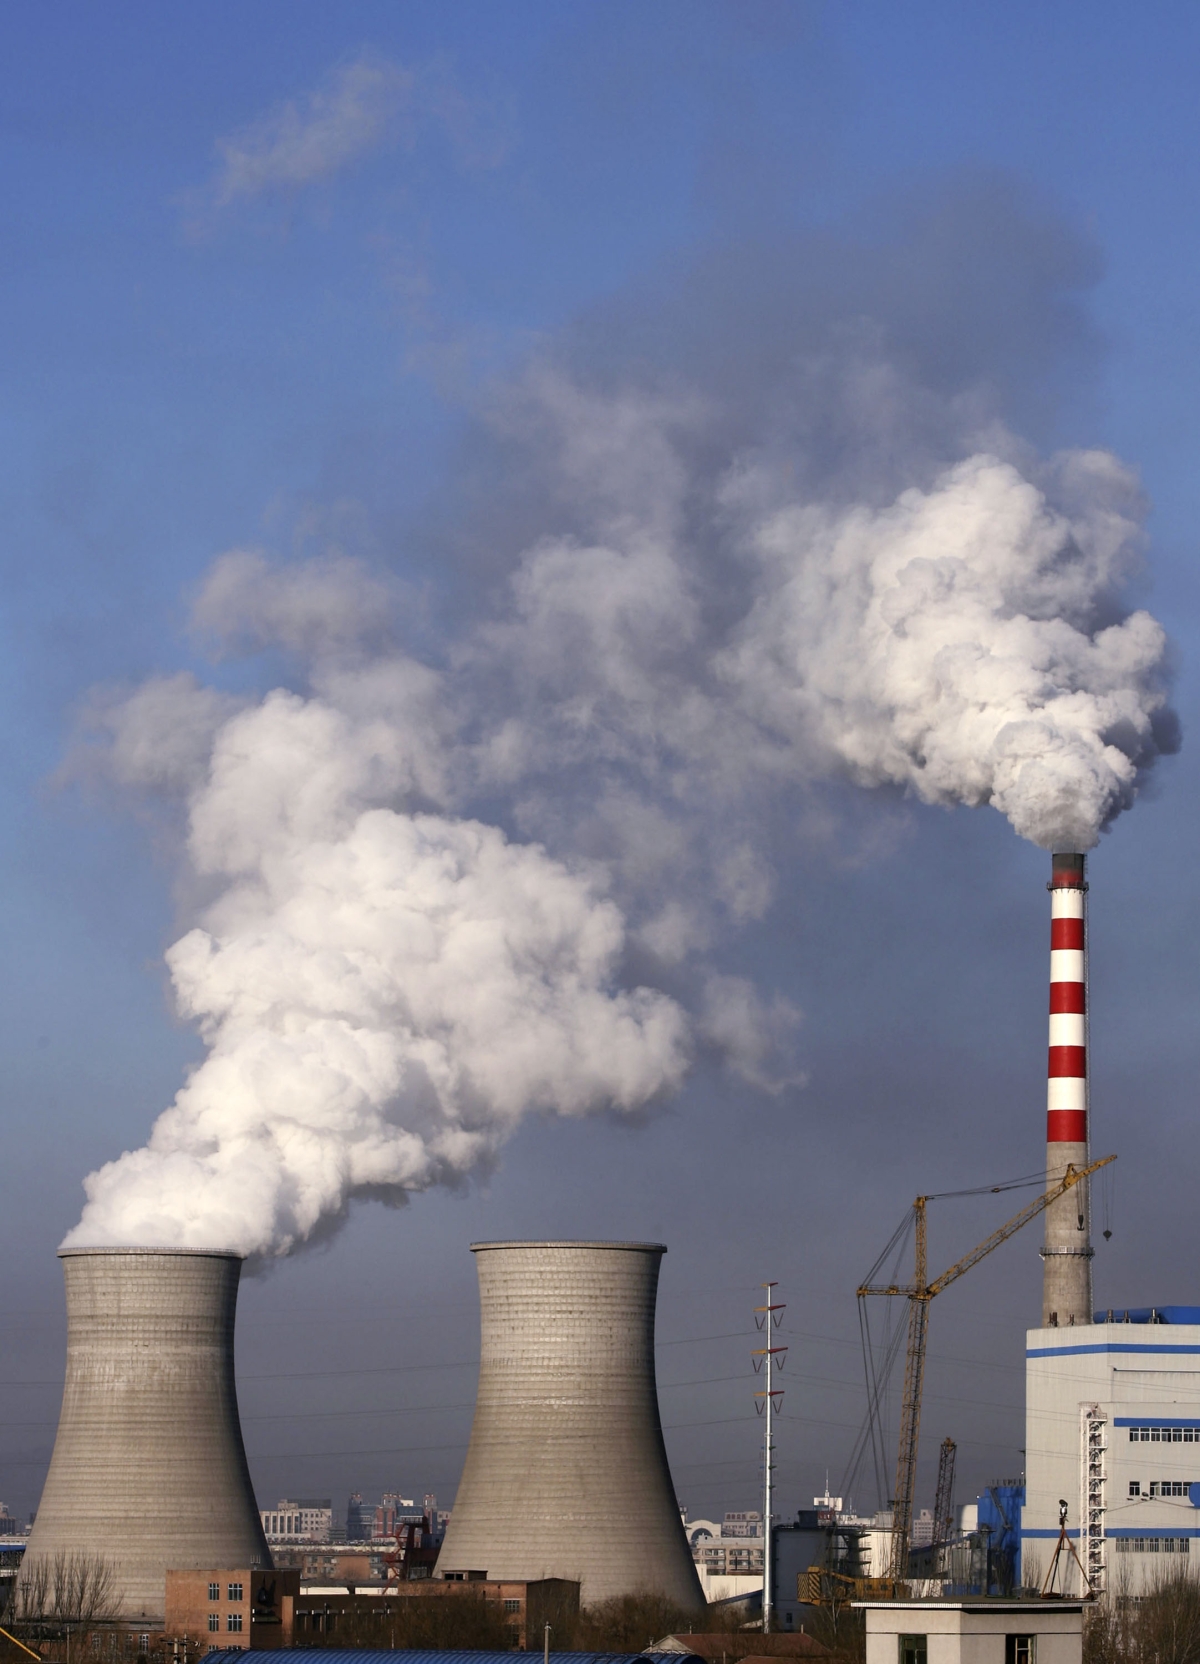 CHIFENG, MONGOLIA - Smoke billows from chimneys at the Chifeng Thermal Power Plant on February 23, 2007 in Chifeng, Mongolia. (China Photos/Getty Images) 